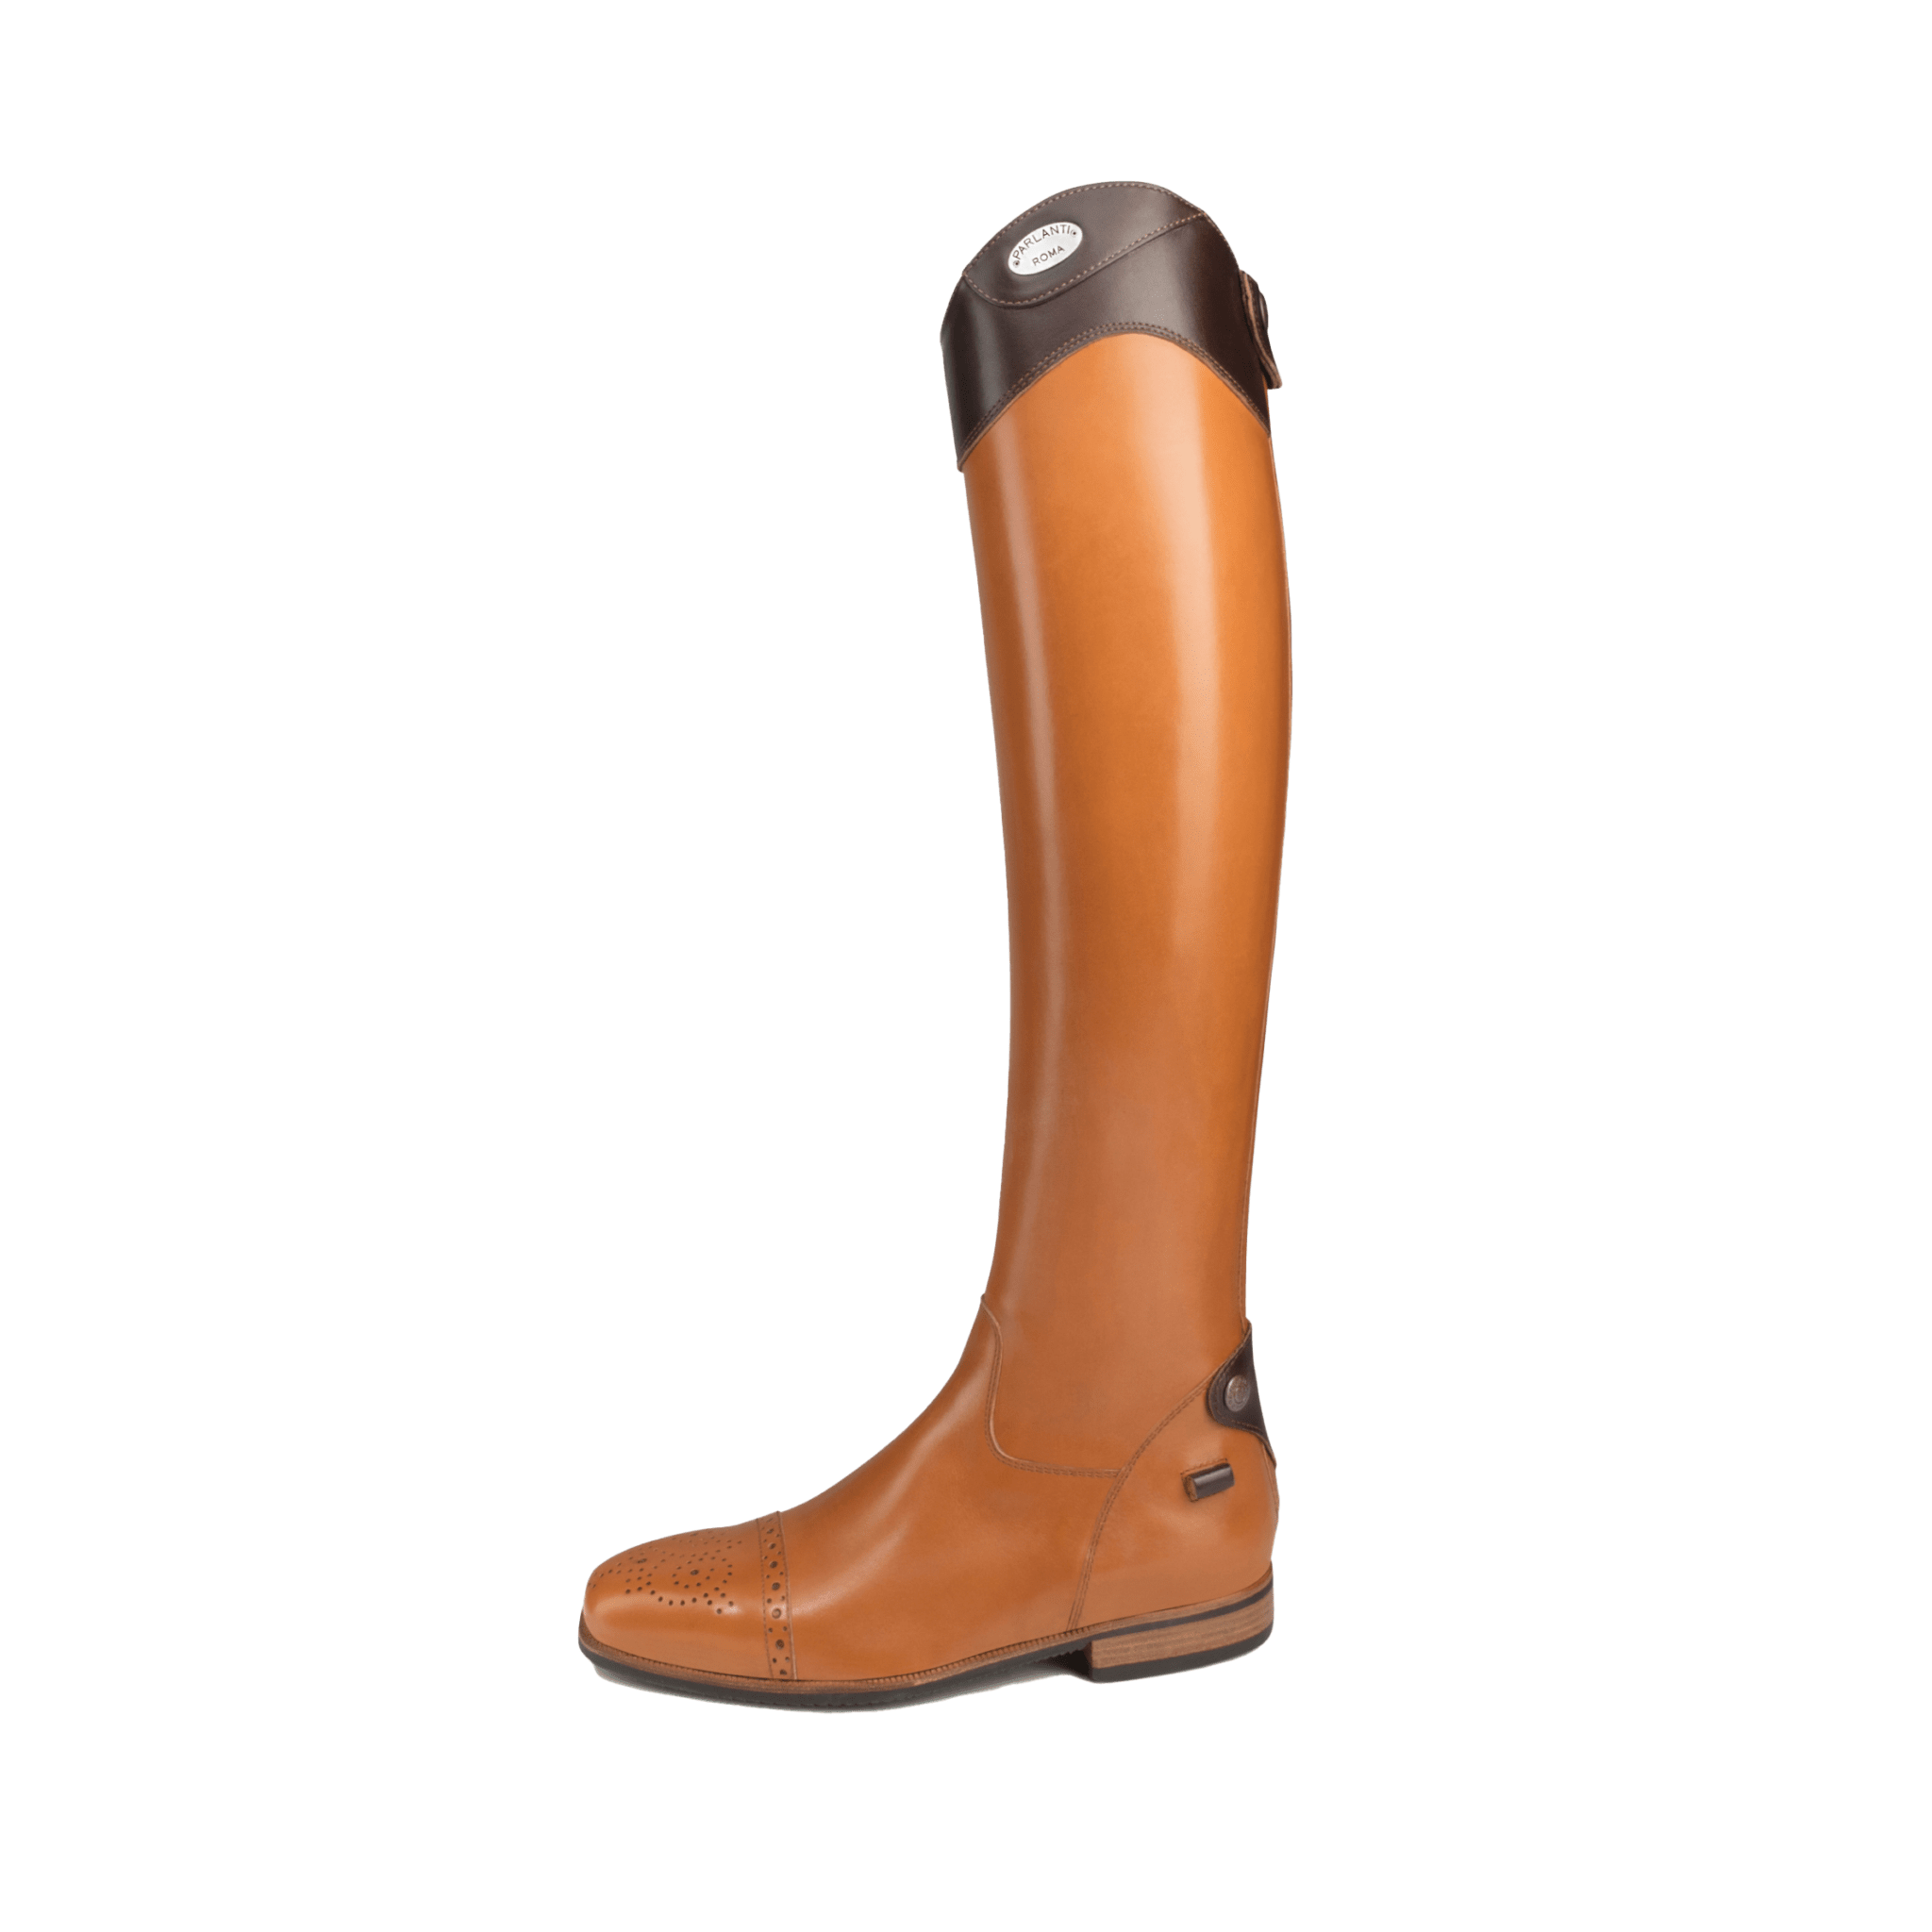 Parlanti Luce Riding Boots